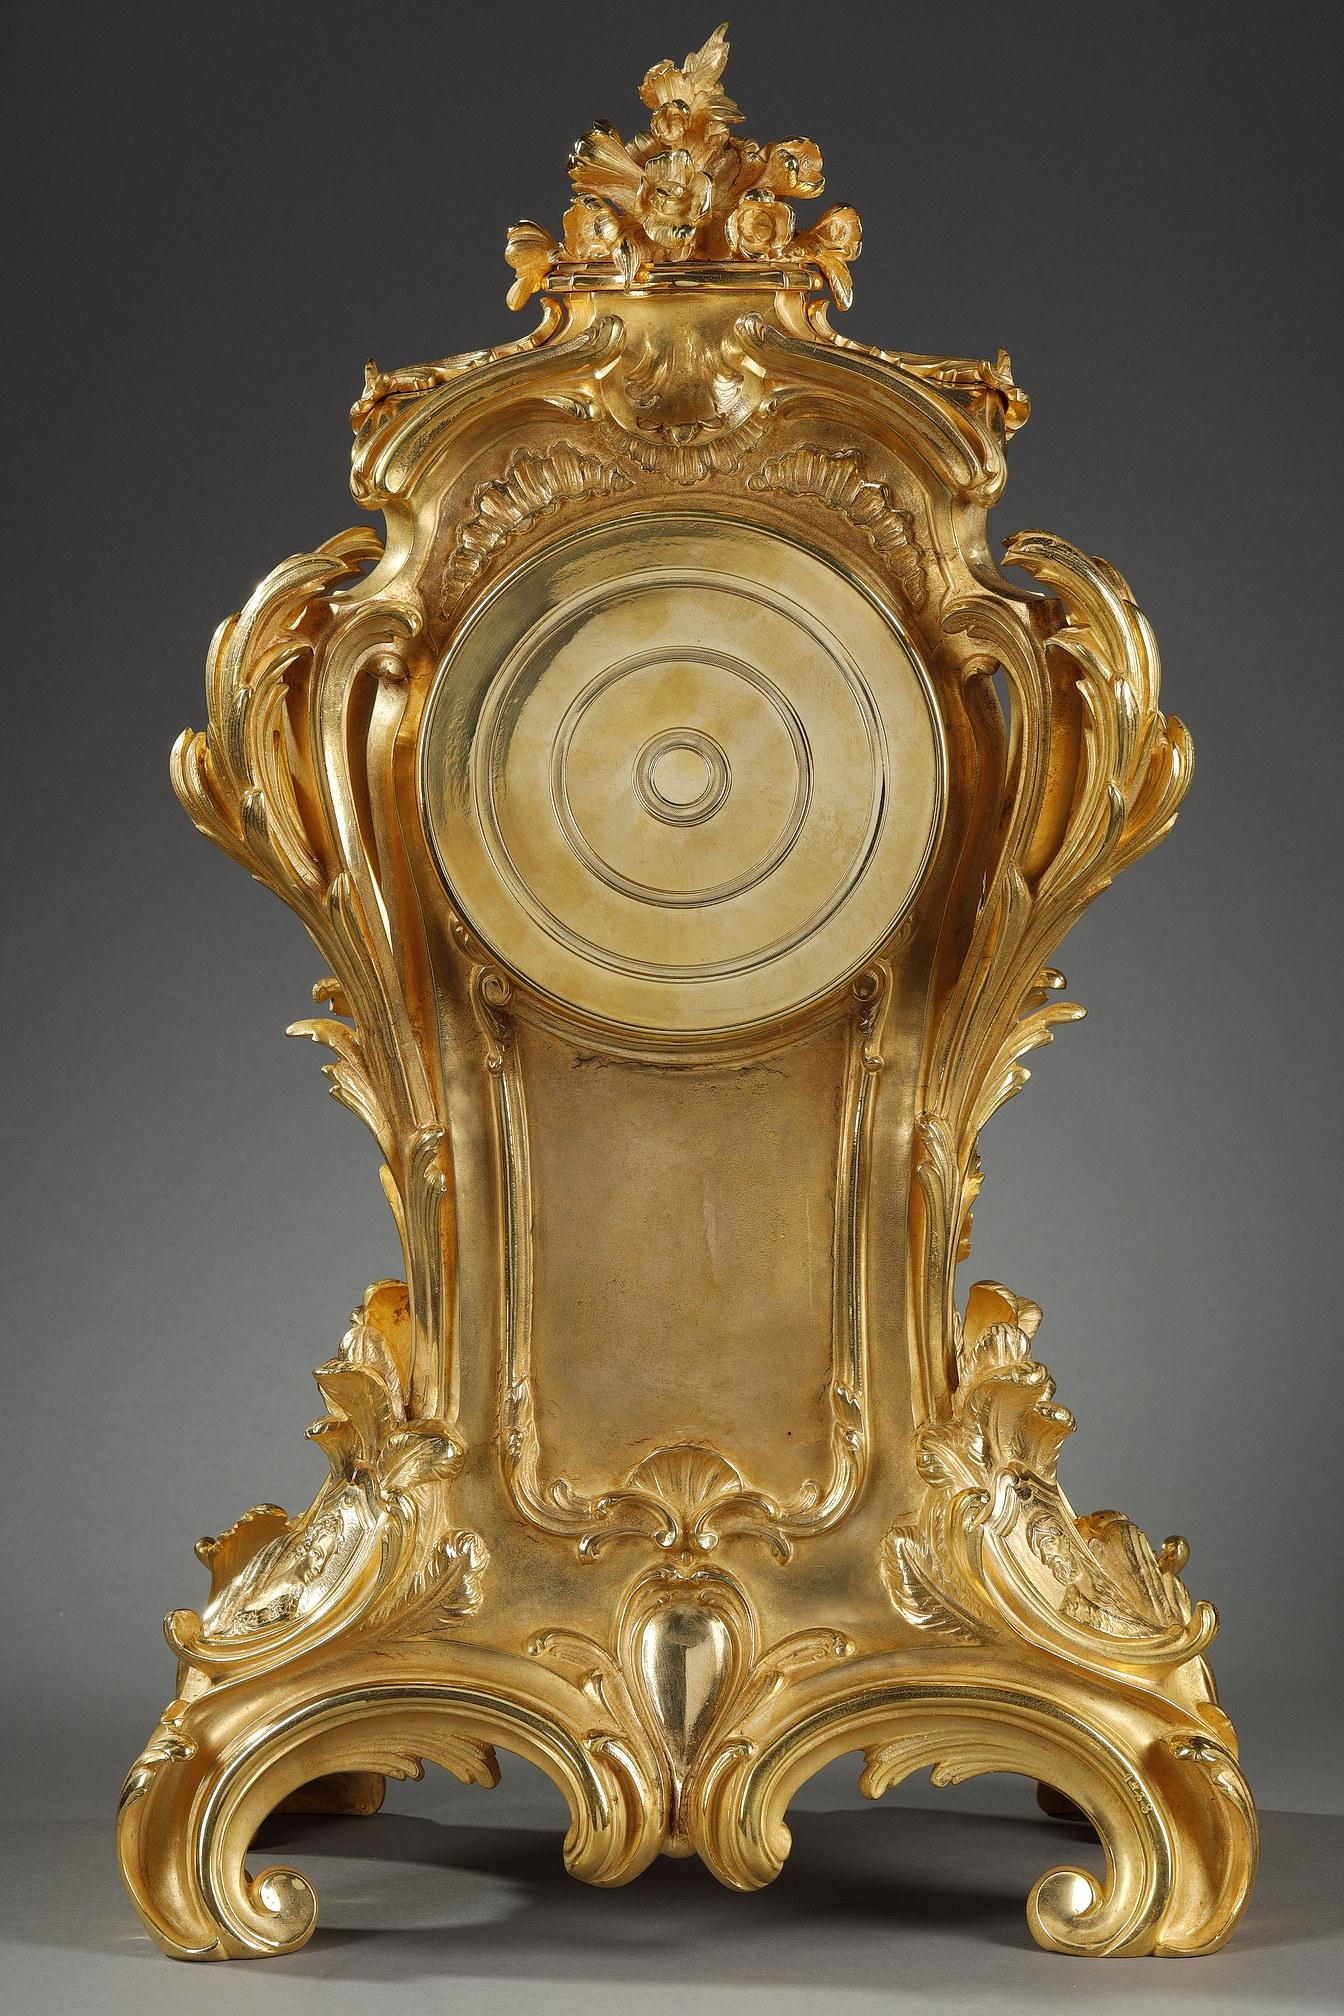 Gilt Ormulu and Chased Bronze Rocaille Clock, Raingo & Frères